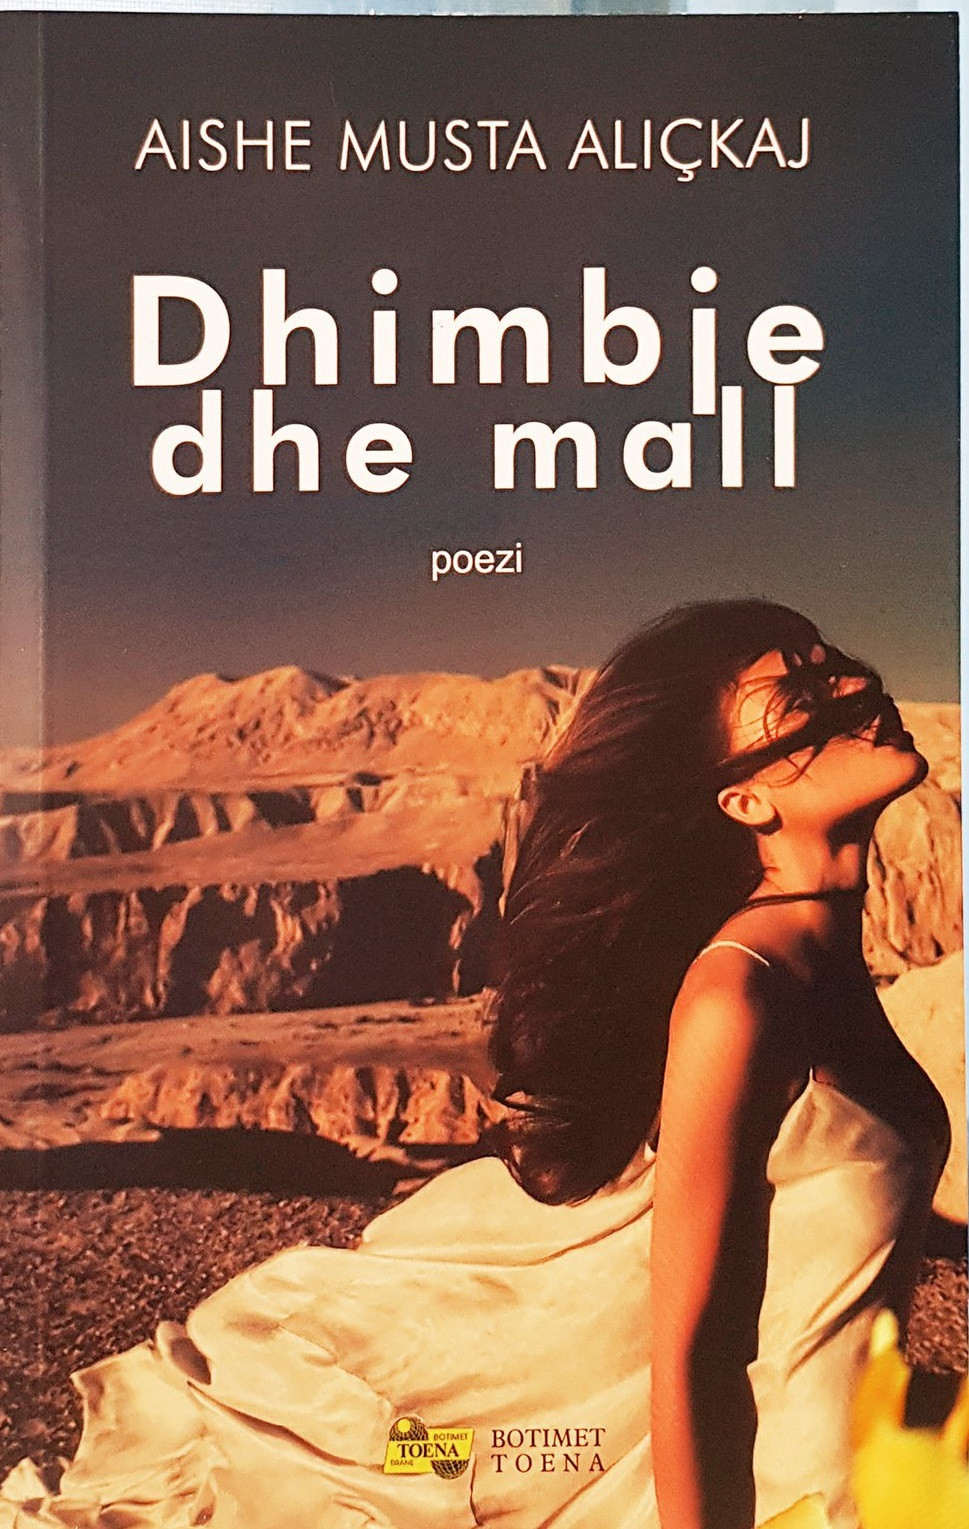 Dhimbje dhe mall